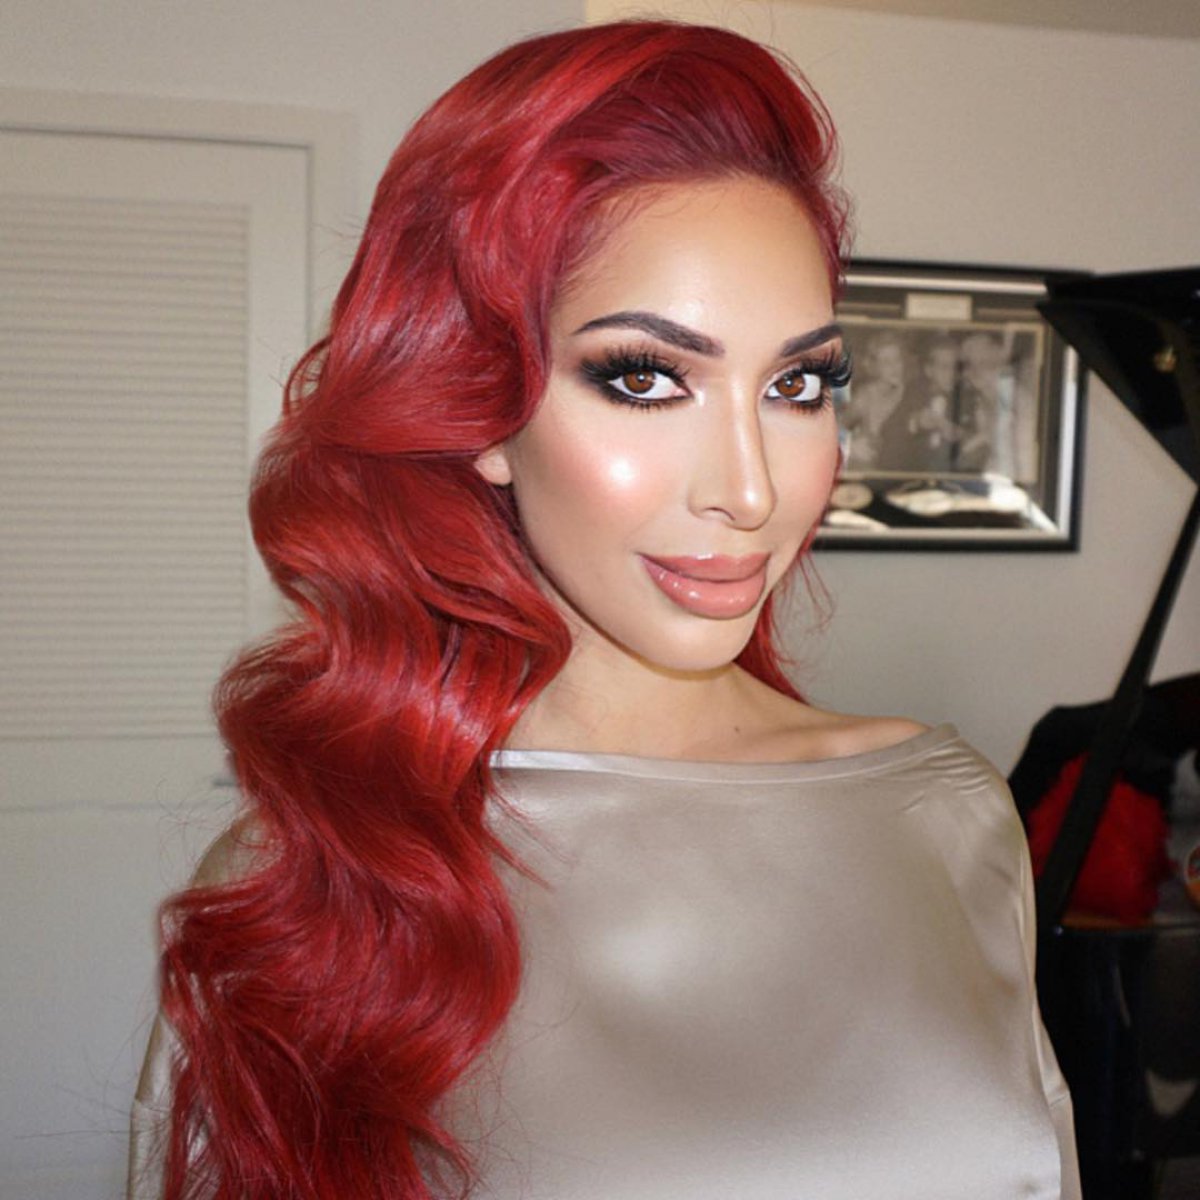 Farrah Abraham Quits Teen Mom Og To Continue Adult Film Career After Blowout Fight With